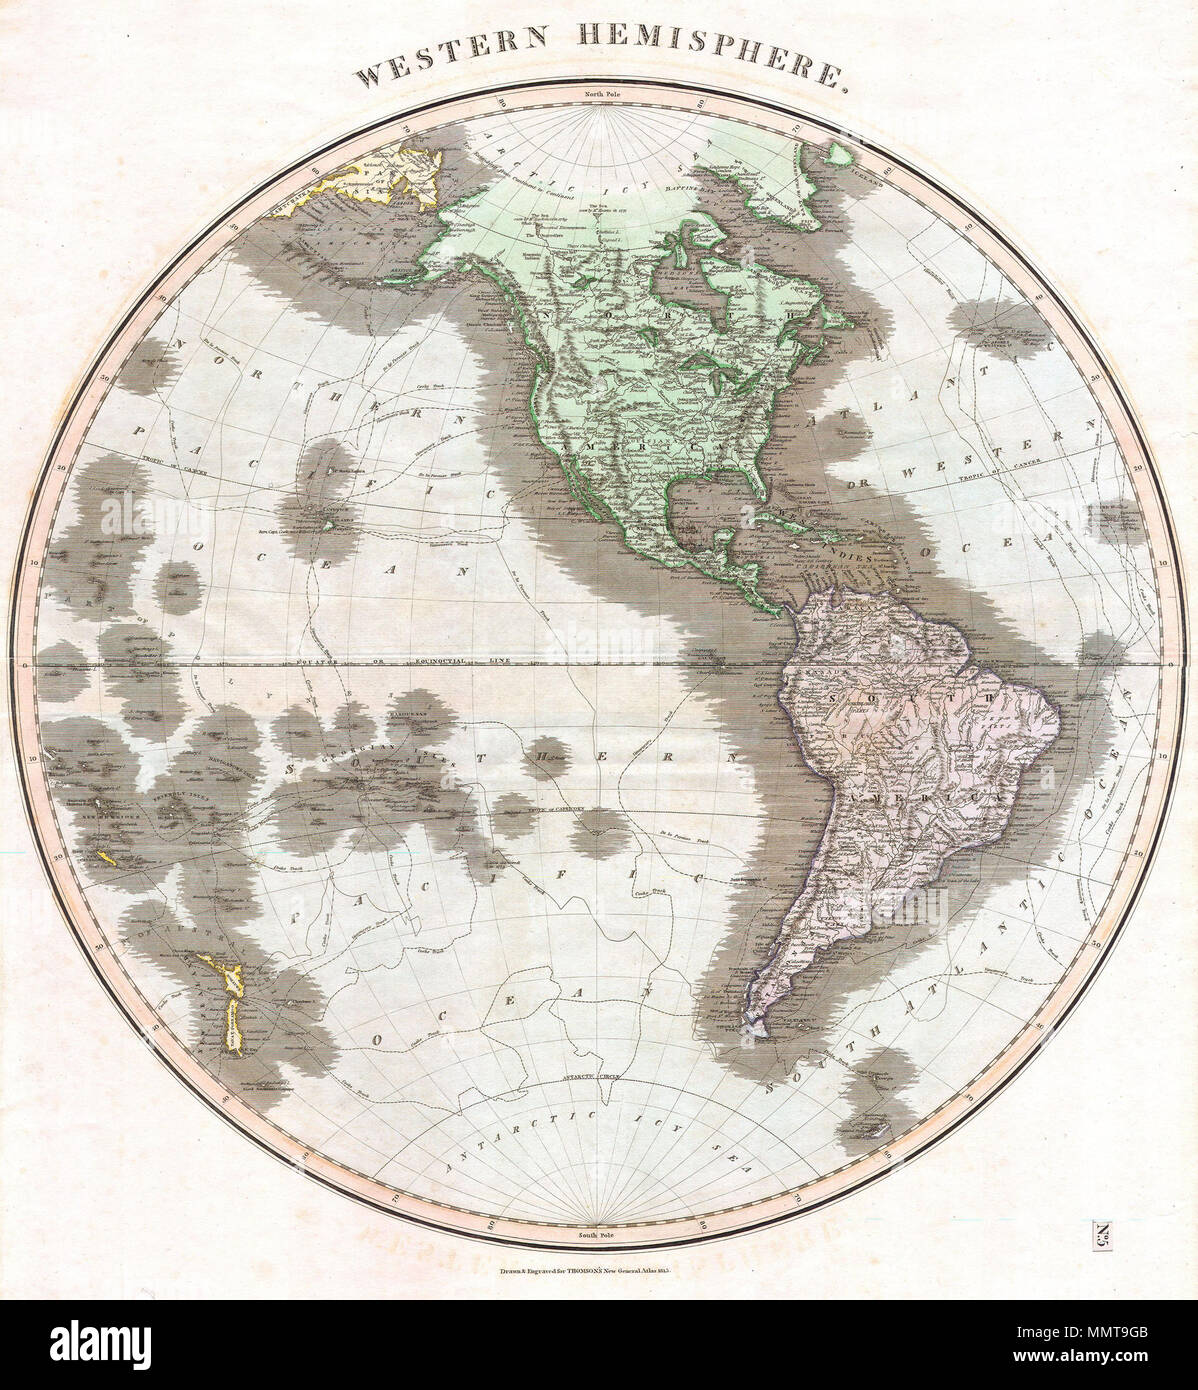 .  English: This fascinating hand colored 1815 map by Edinburgh cartographer John Thomson depicts North America and South America or the Western Hemisphere. Map covers from the Arctic to the Antarctic and from New Zealand to the Cape Verde Islands. Depicts the routes of various important explorers include Cook, Gores, Vancouver and Perouse. America's Northwest Coast is only vaguely mapped. Dated, 1815. One of the finest maps of the Western Hemisphere to appear in the 19th century.  Western Hemisphere.. 1814. 1814 Thomson Map of the Western Hemisphere ( North America ^ South America ) - Geograp Stock Photo